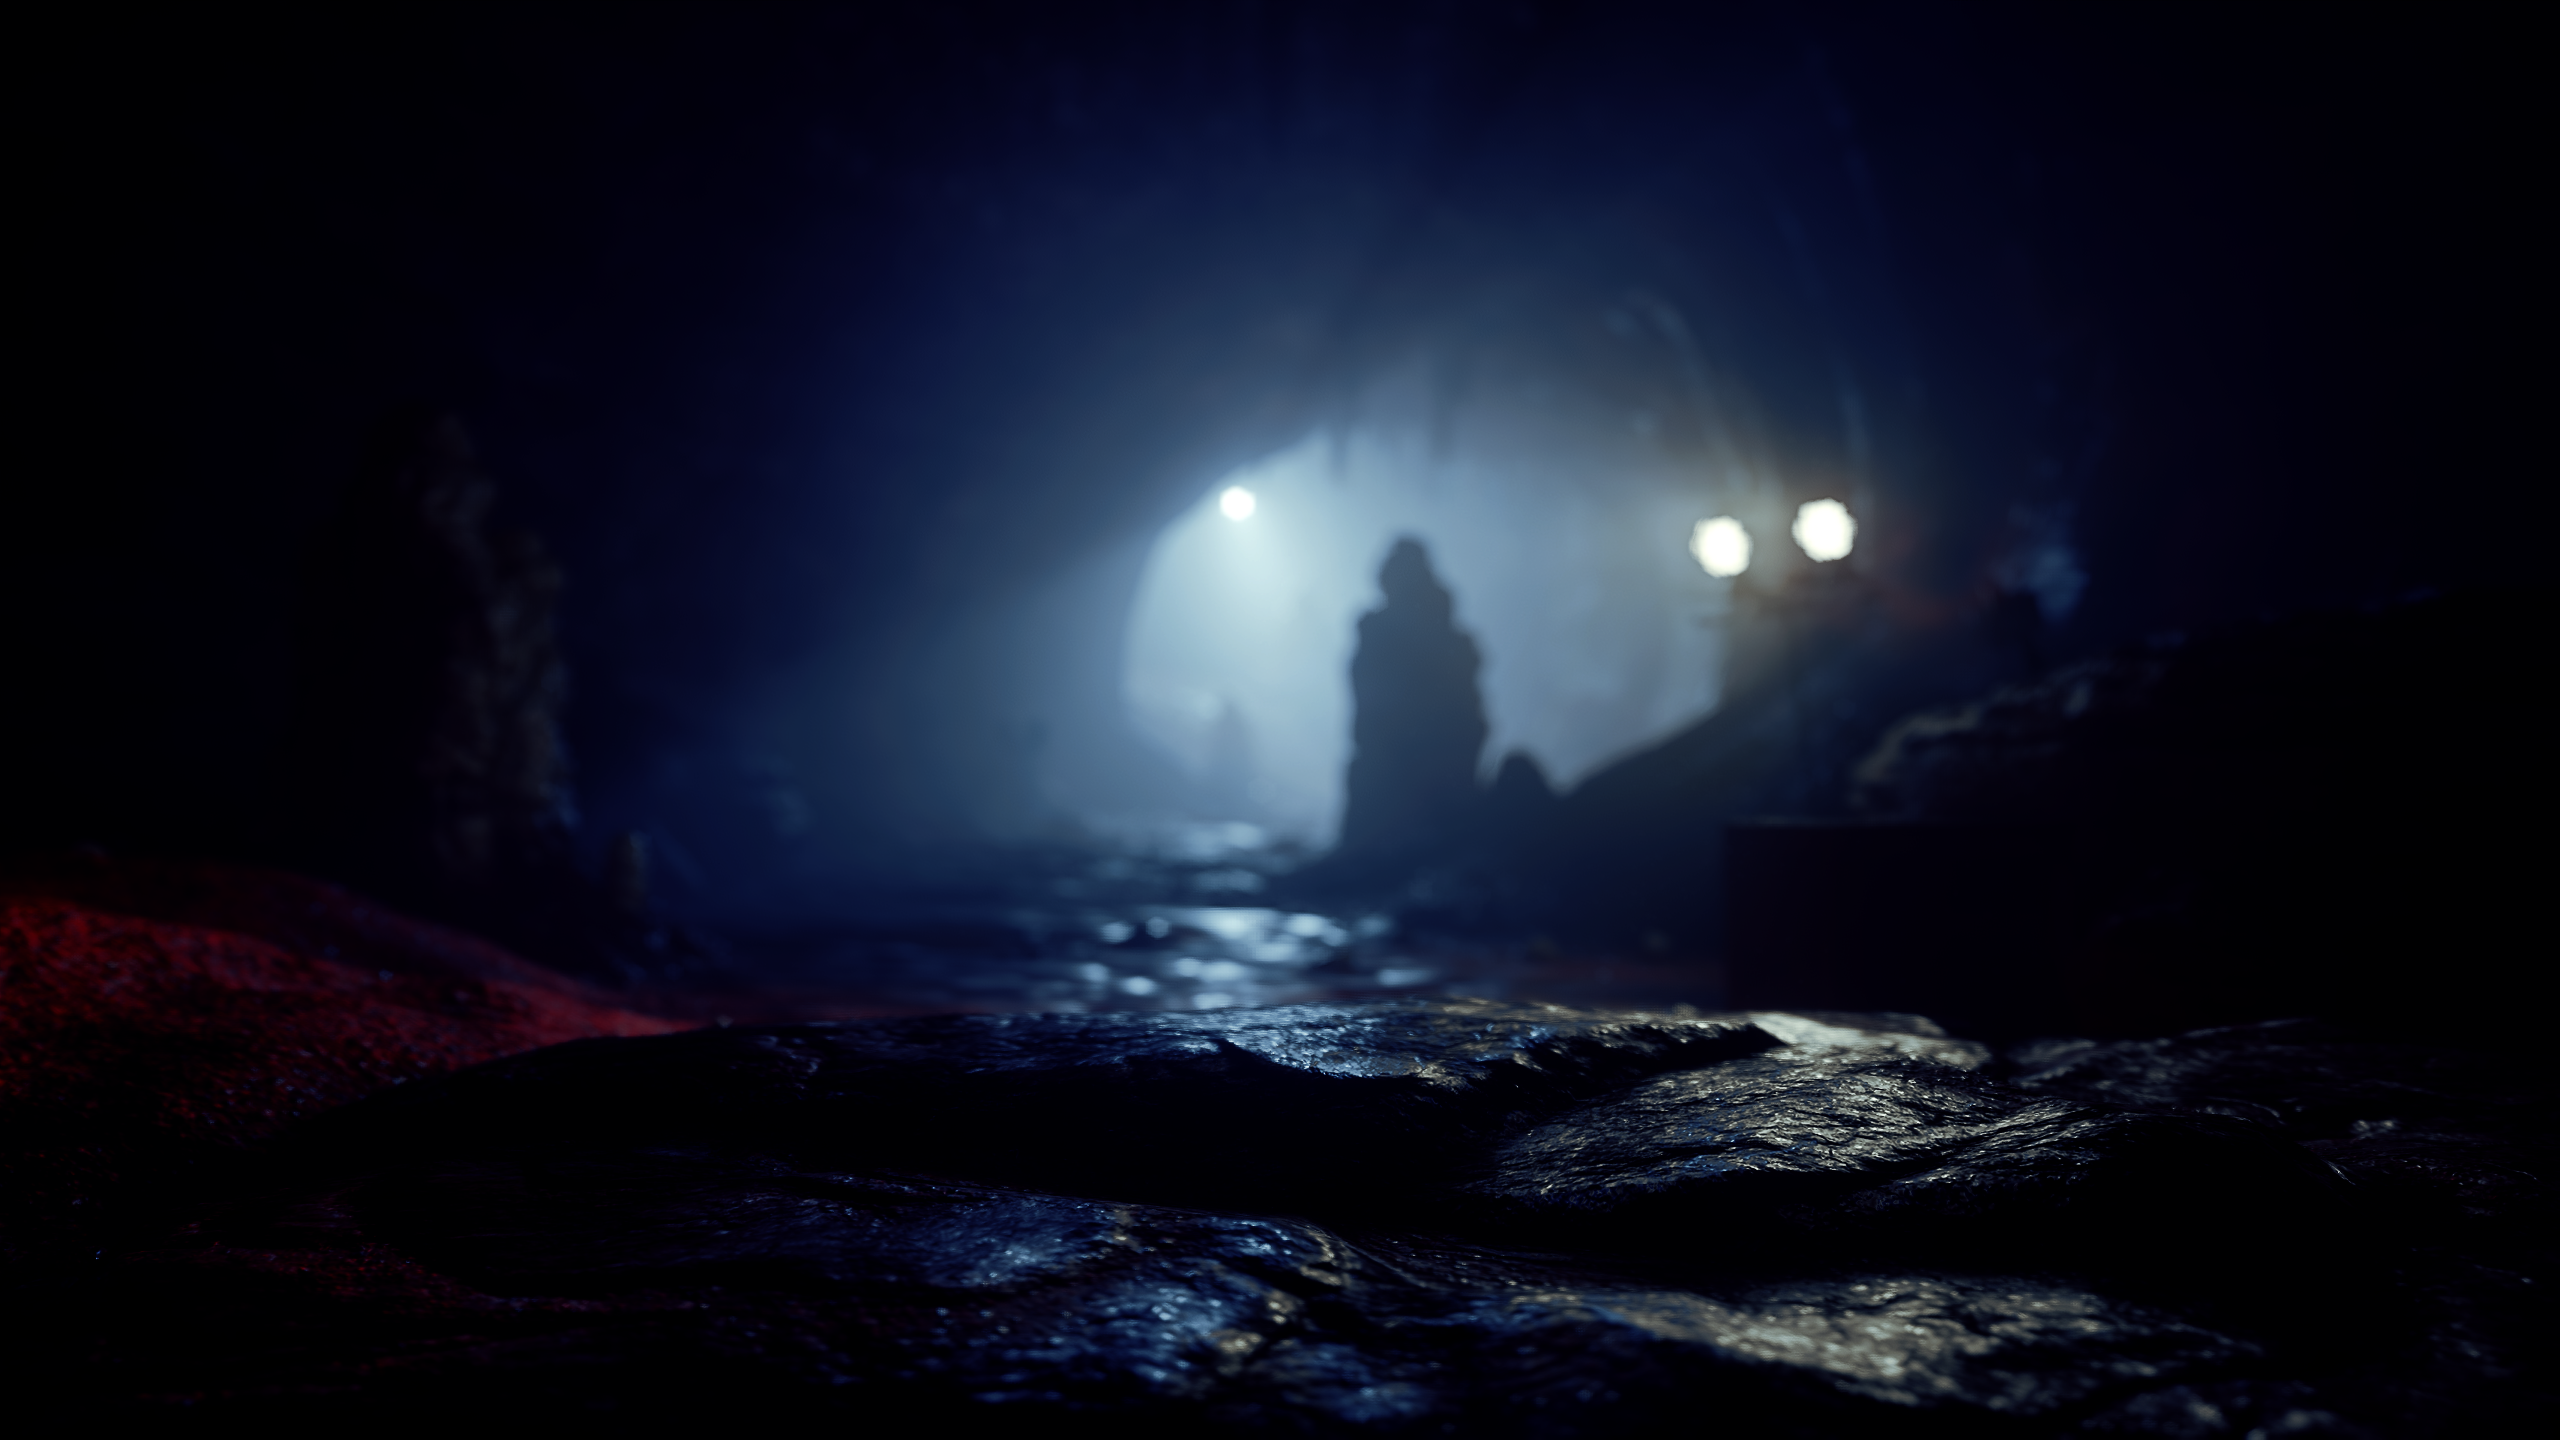 Video Games Remedy Games Control Control 2019 PC Game PC Gaming Screen Shot Dark Cave 2560x1440